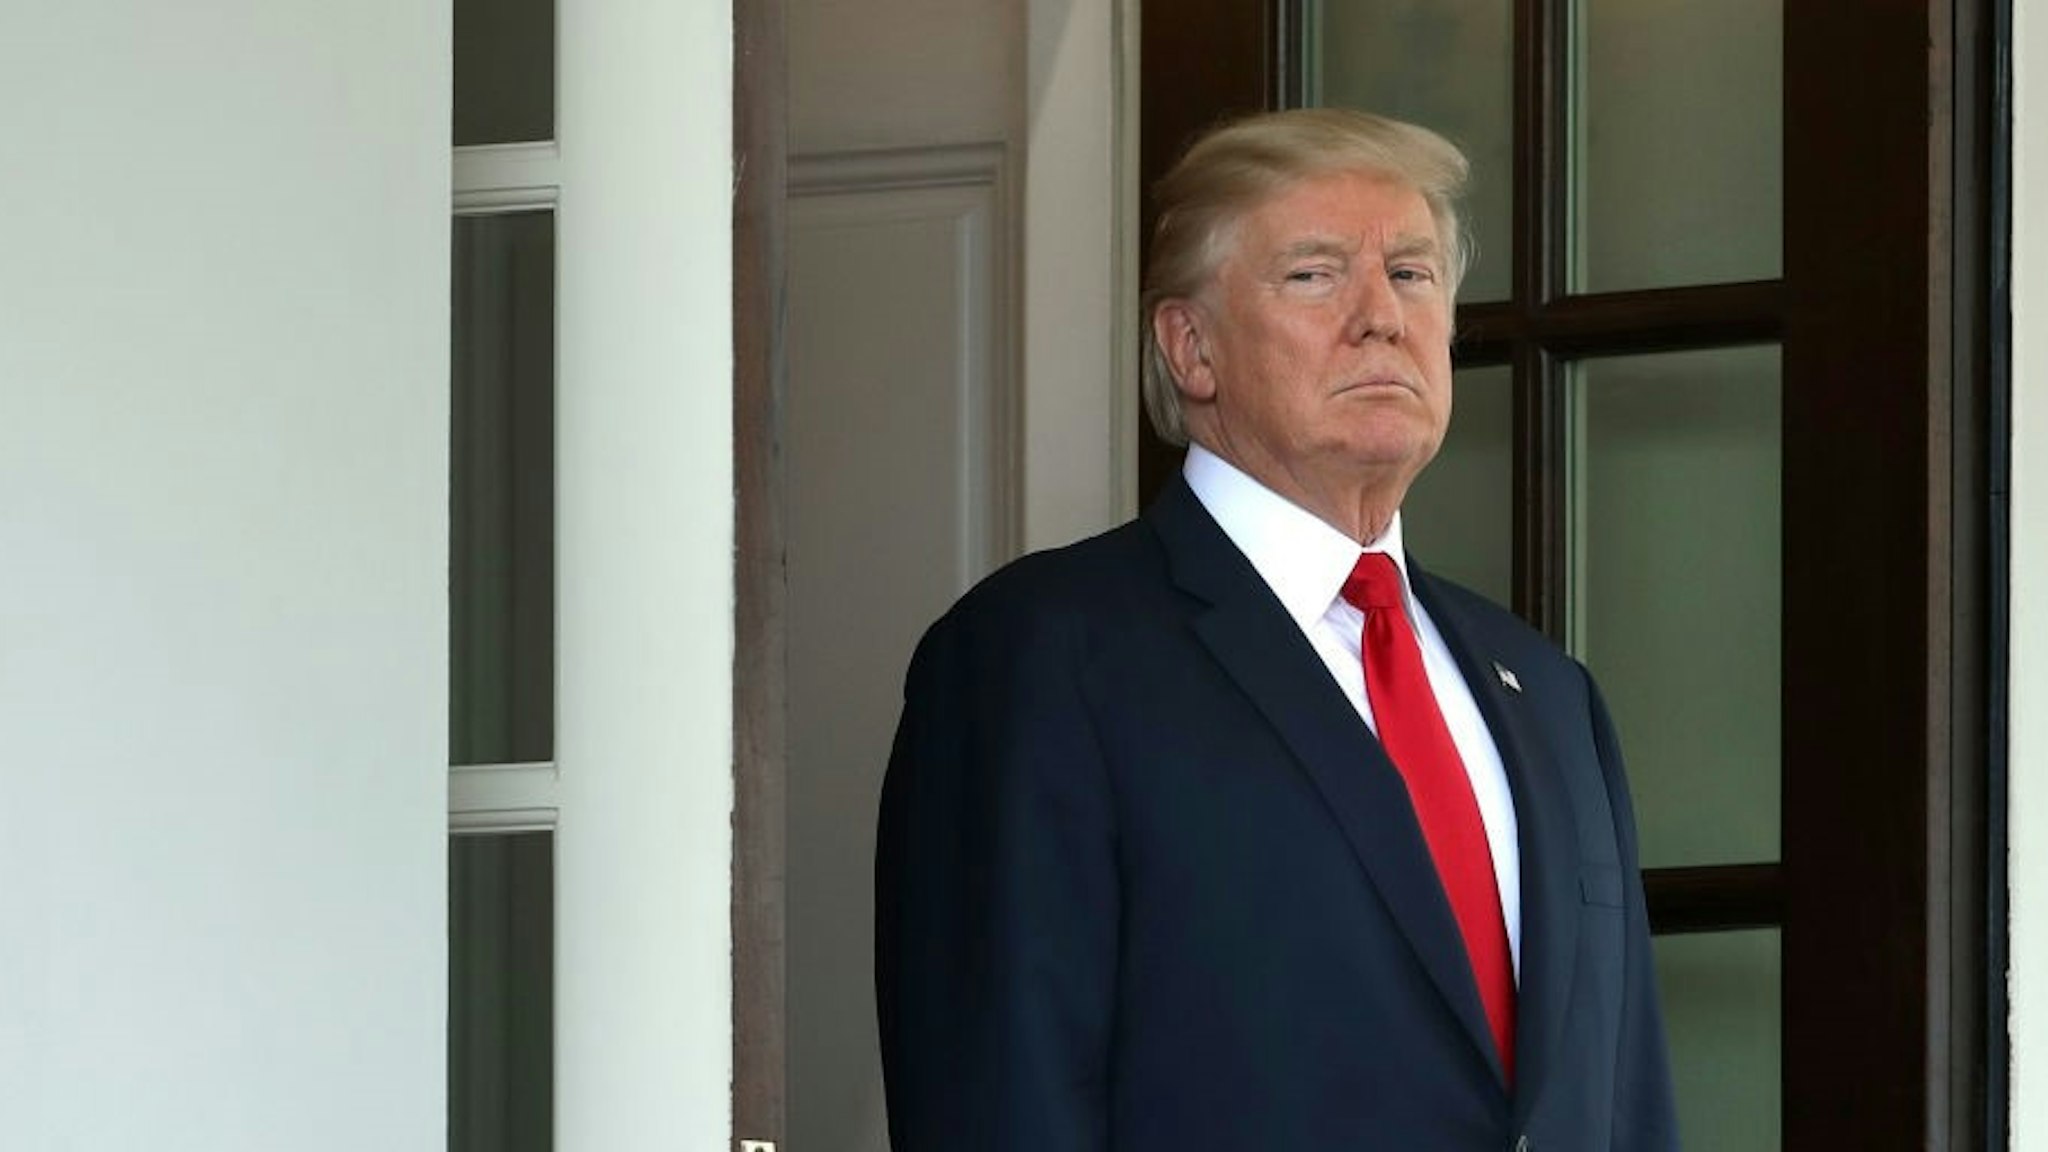 WASHINGTON, DC - AUGUST 28: U.S. President Donald Trump awaits the arrival of Finnish President Sauli Niinisto to the White House August 28, 2017 in Washington, DC. The two leaders are expected to discuss security in the Baltic Sea region, Russia and NATO during the meeting, the first between Niinisto and Trump and the first one-on-one White House meeting between a Finnish and an American president in 15 years. (Photo by